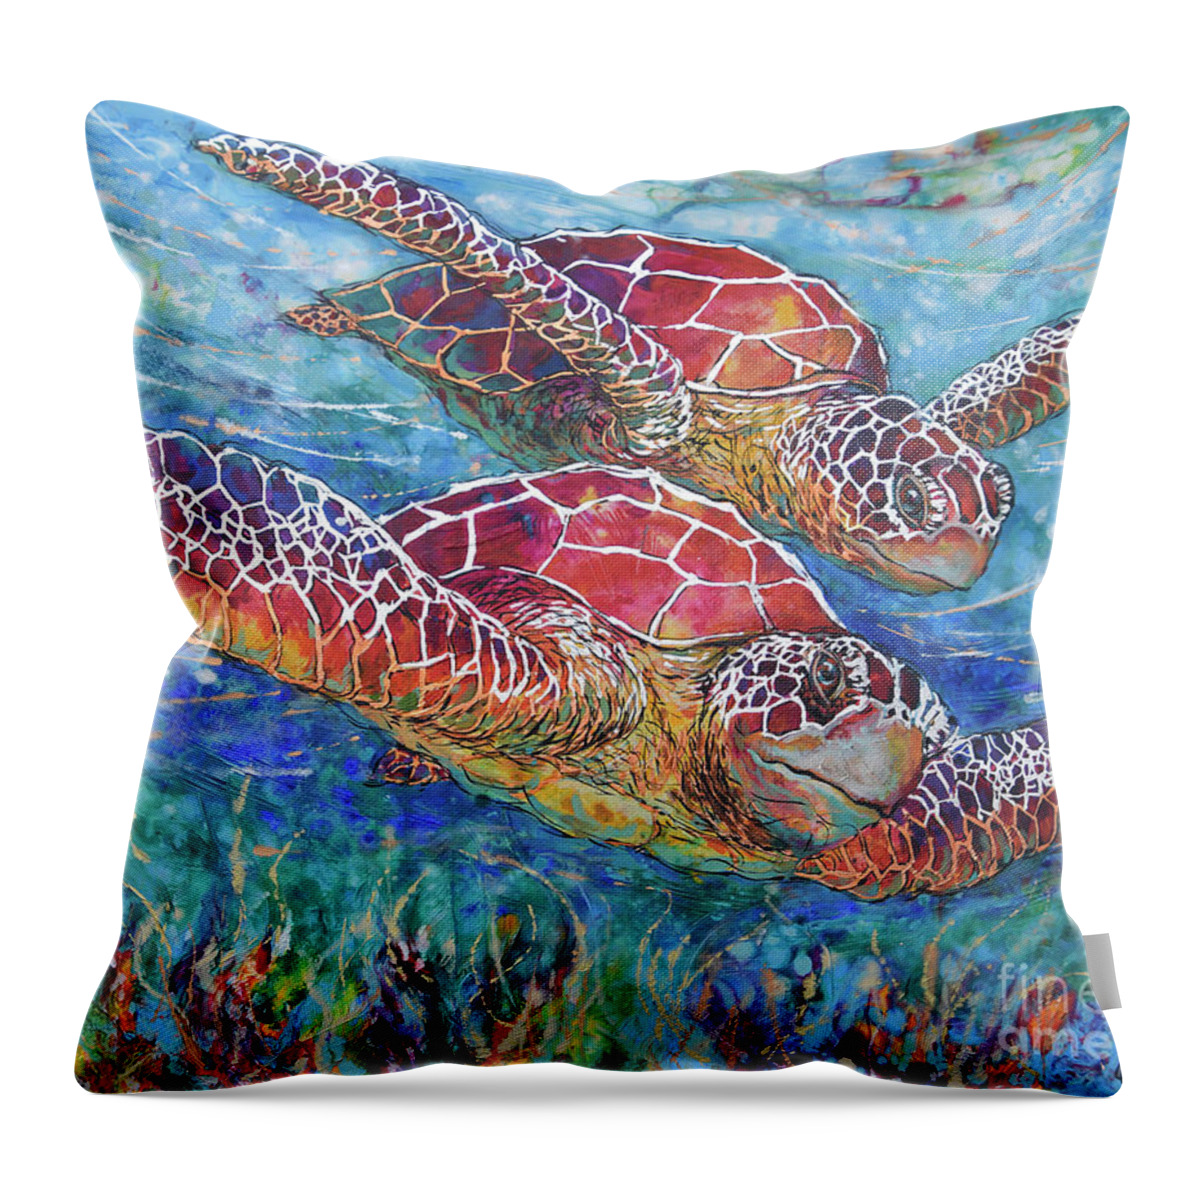  Throw Pillow featuring the painting Sea Turtle Buddies III by Jyotika Shroff